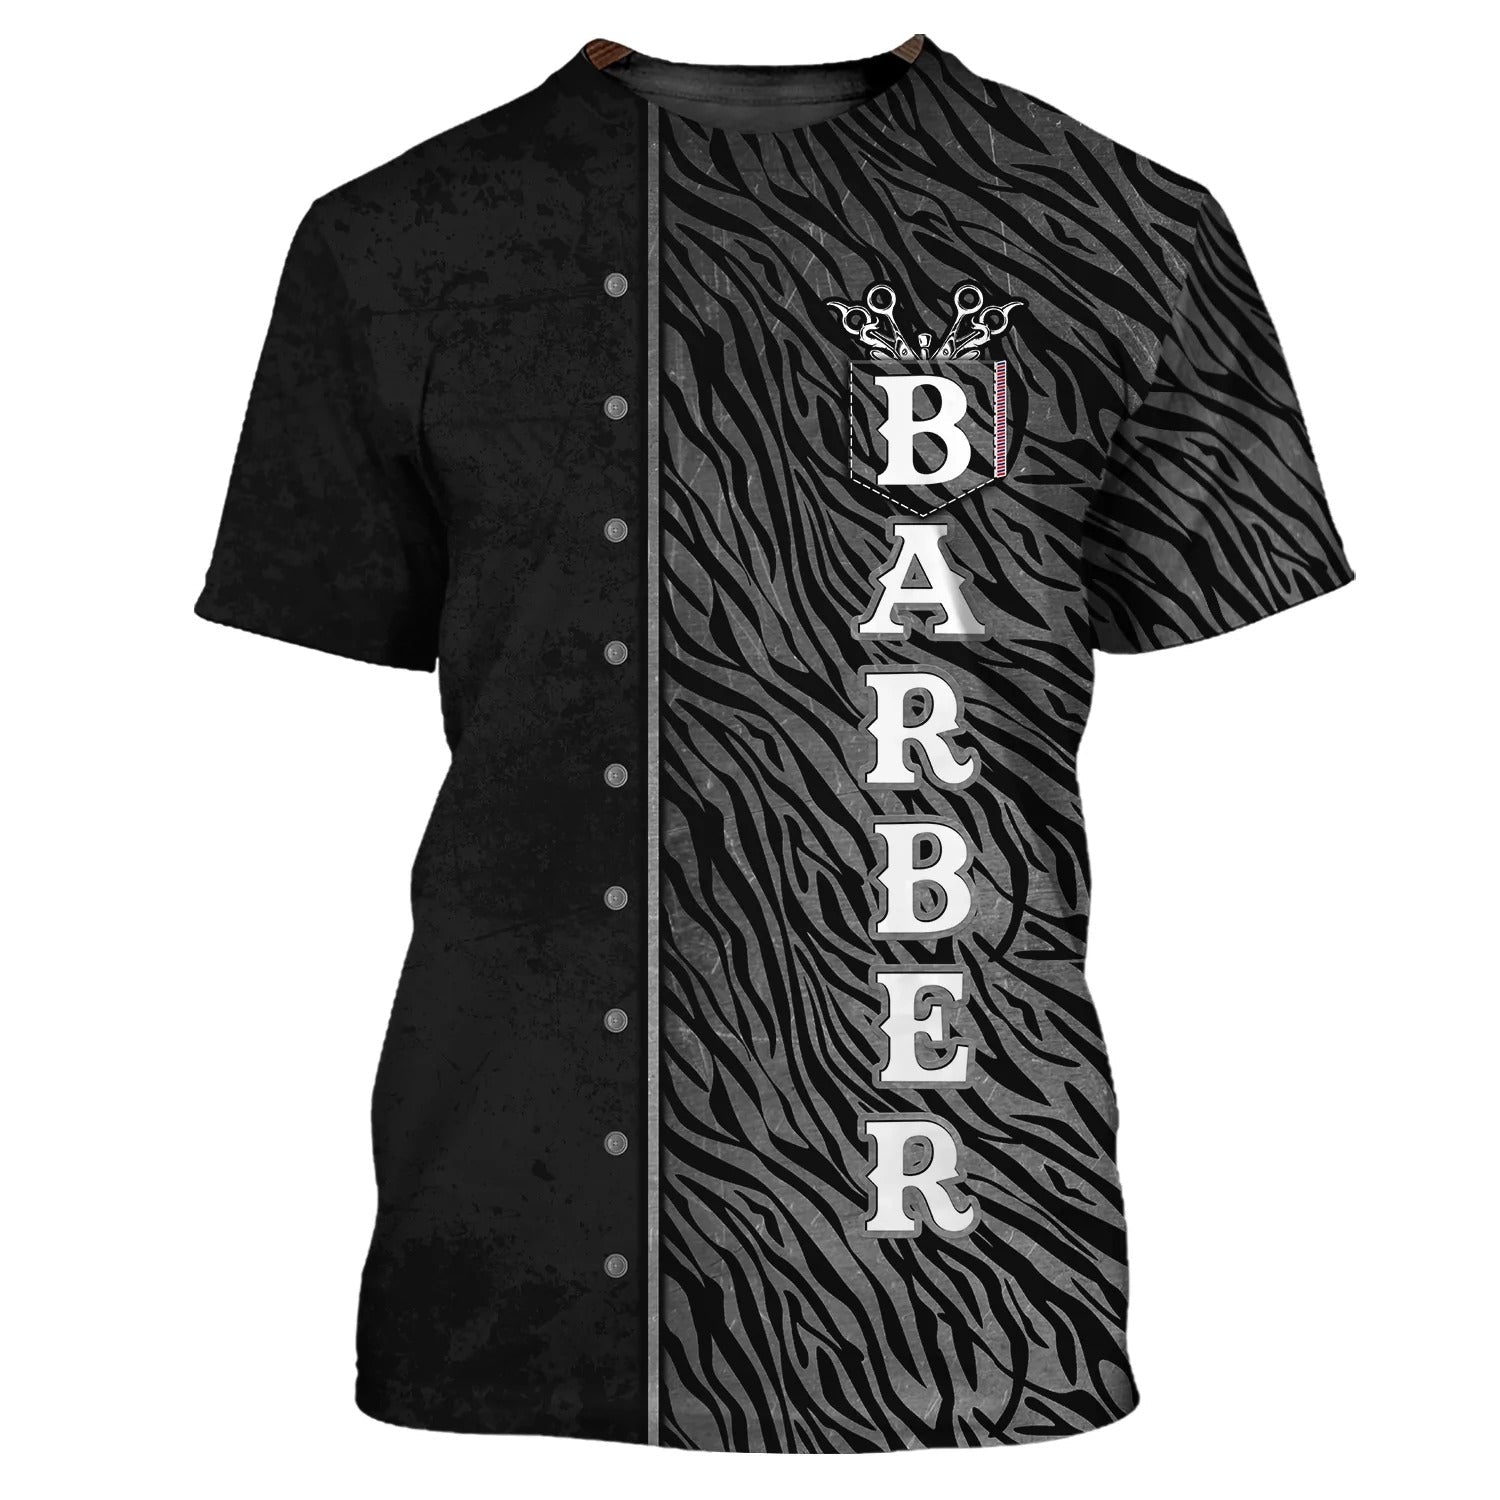 Personalized 3D All Over Print Barber Shirt/ Barber Shop Animal Gang Tshirt/ Barber Gift/ Barbershop Uniform